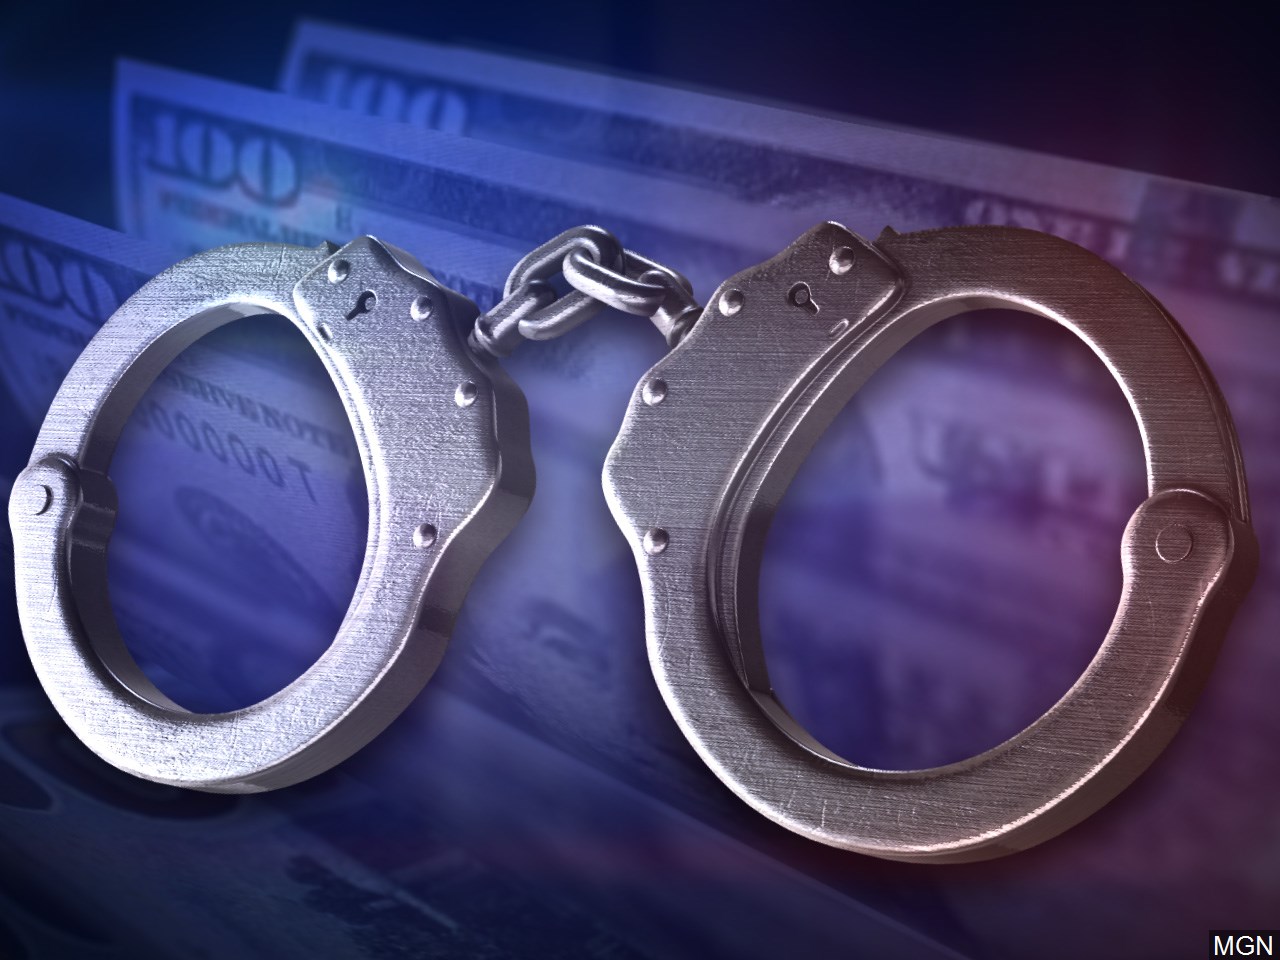 Church bookkeeper in Anniston charged in nearly $500,000 theft